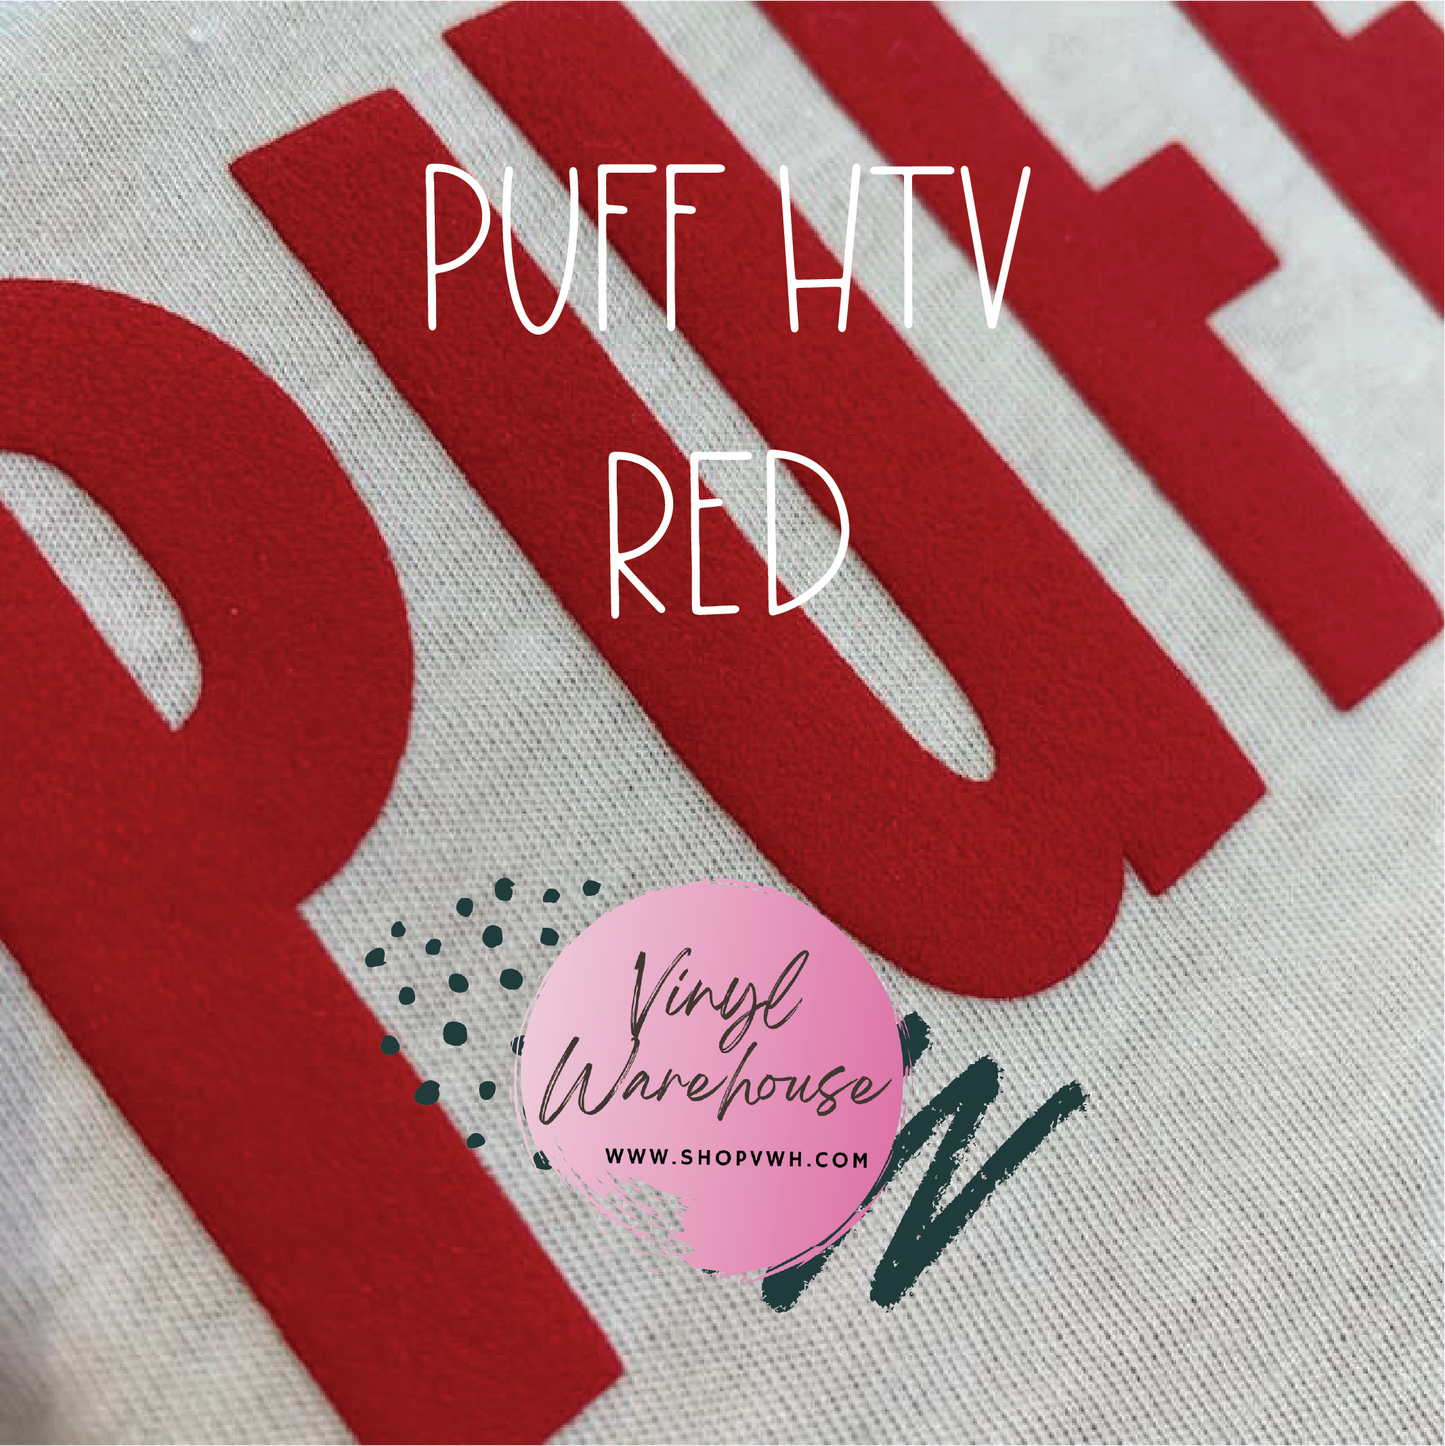 Puff HTV - Red – The Vinyl Warehouse